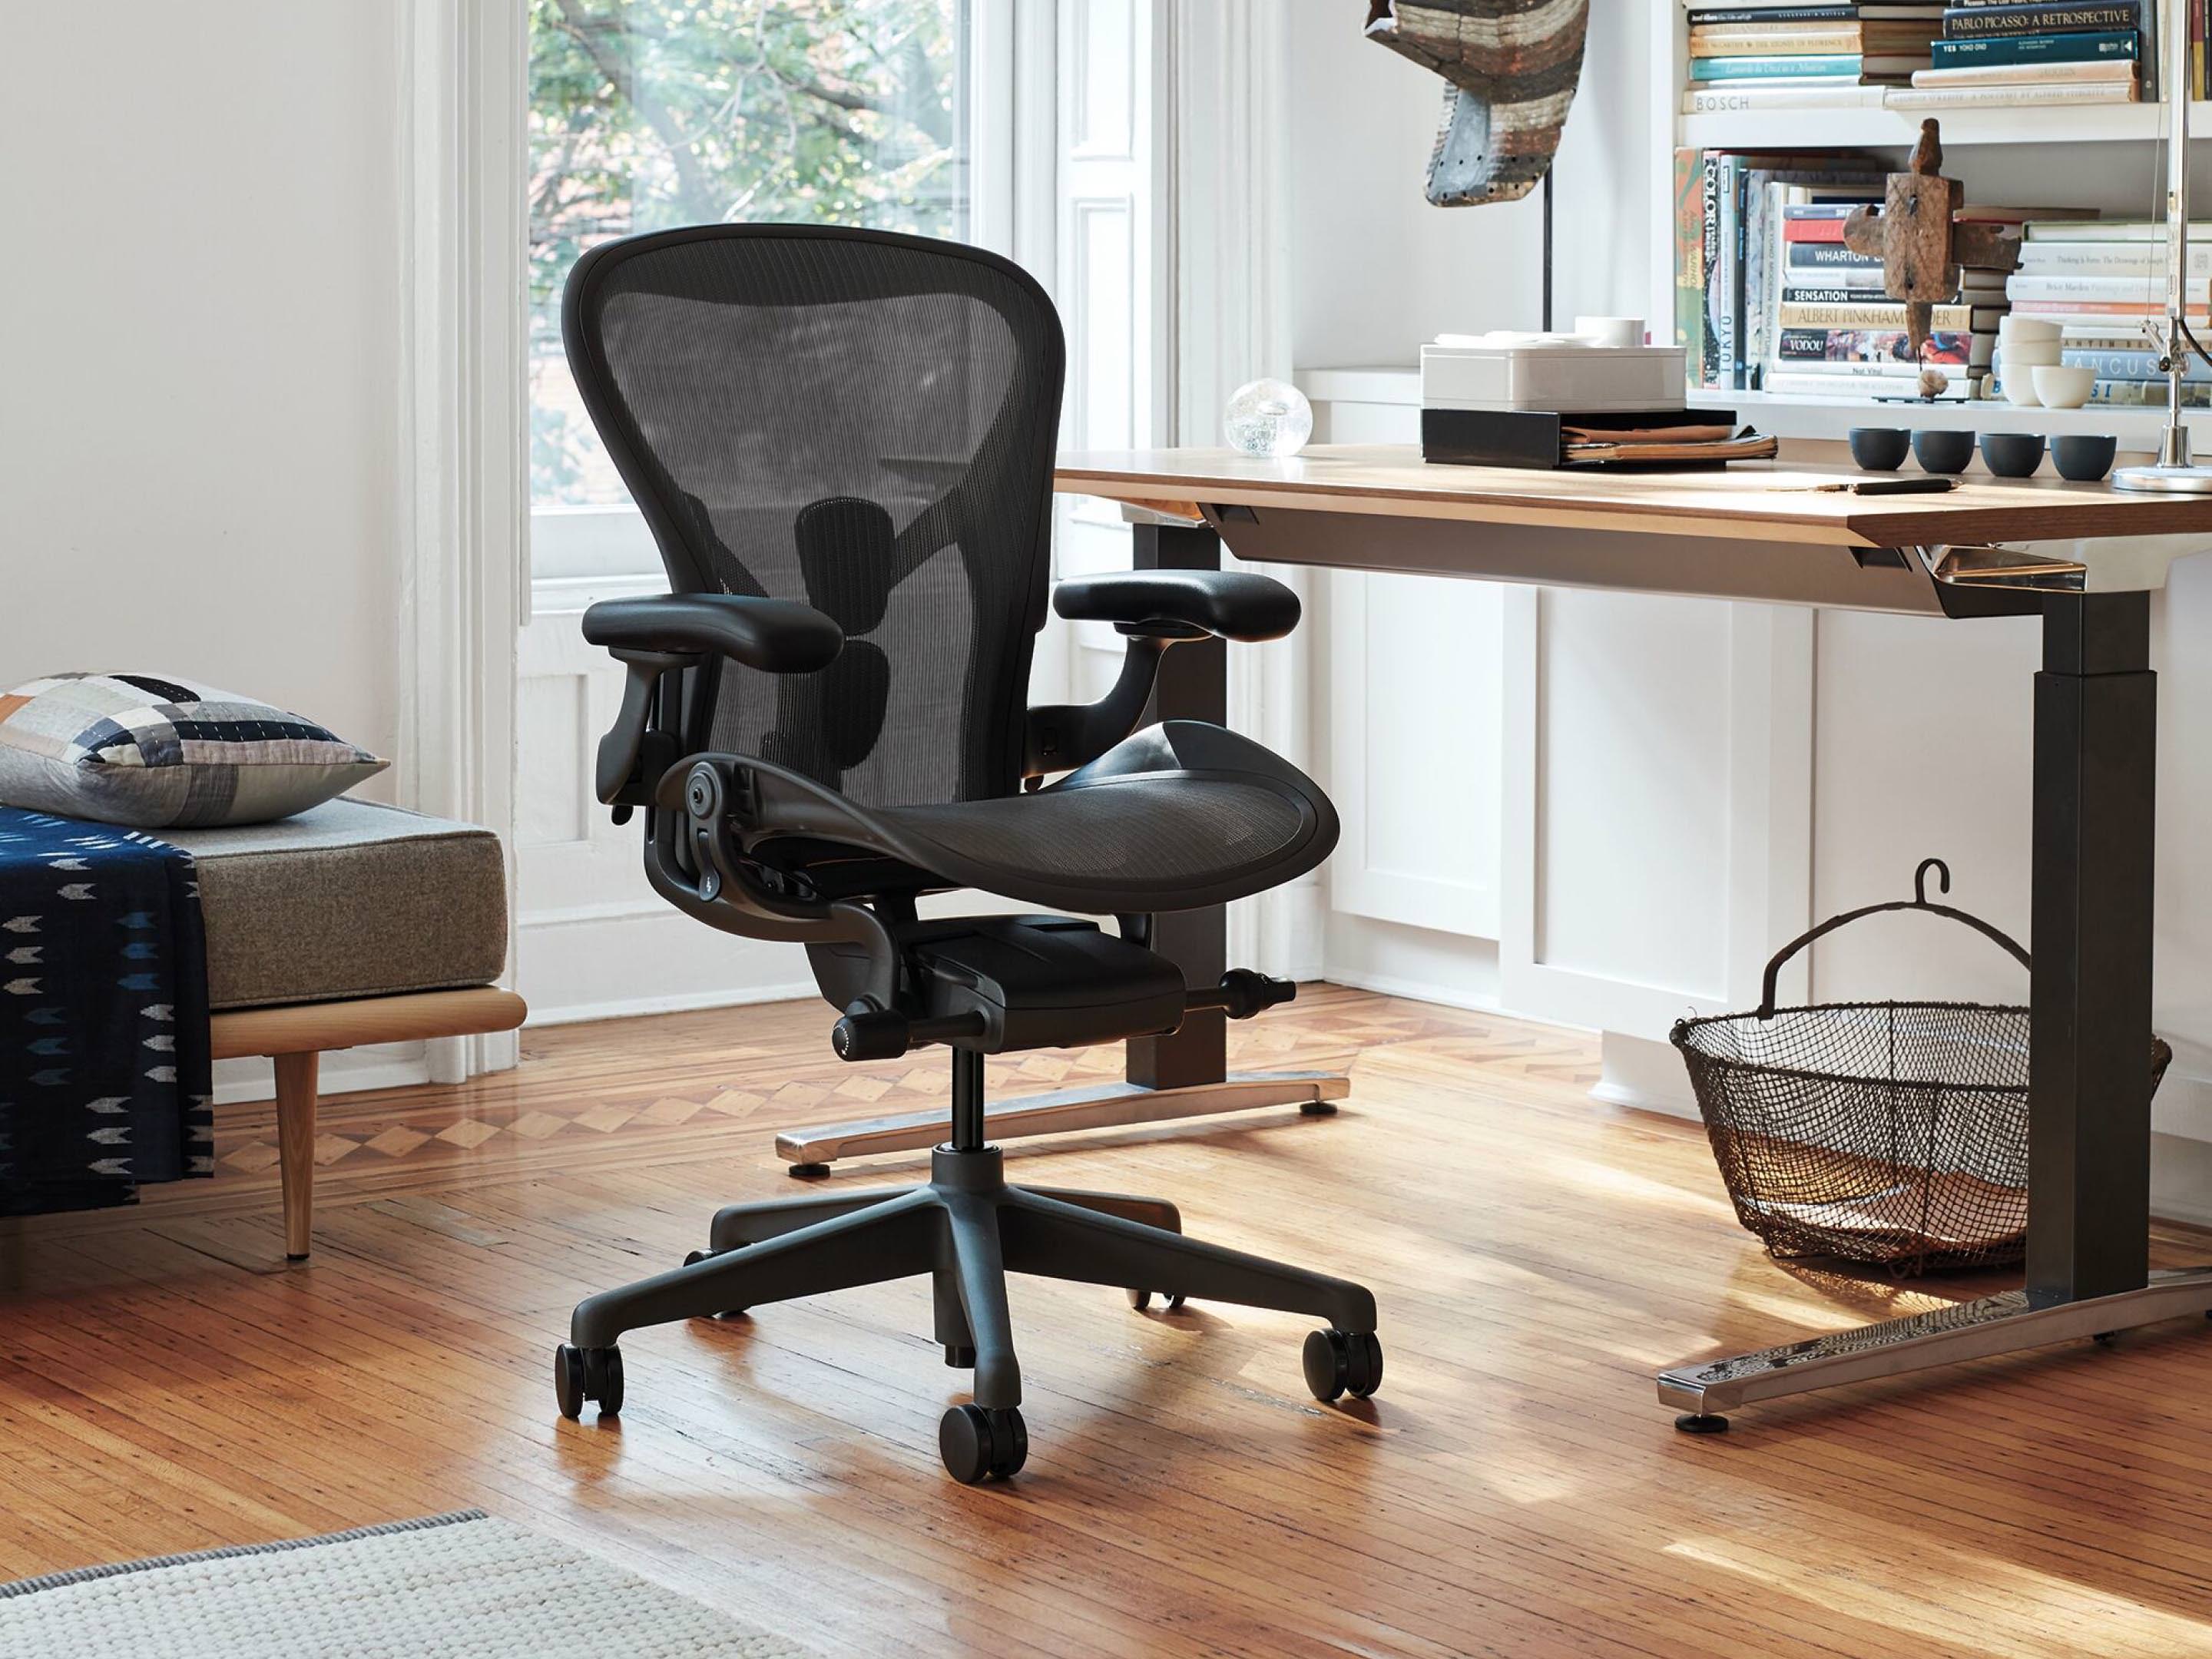 Everything You Need to Know About the Herman Miller Aeron Chair